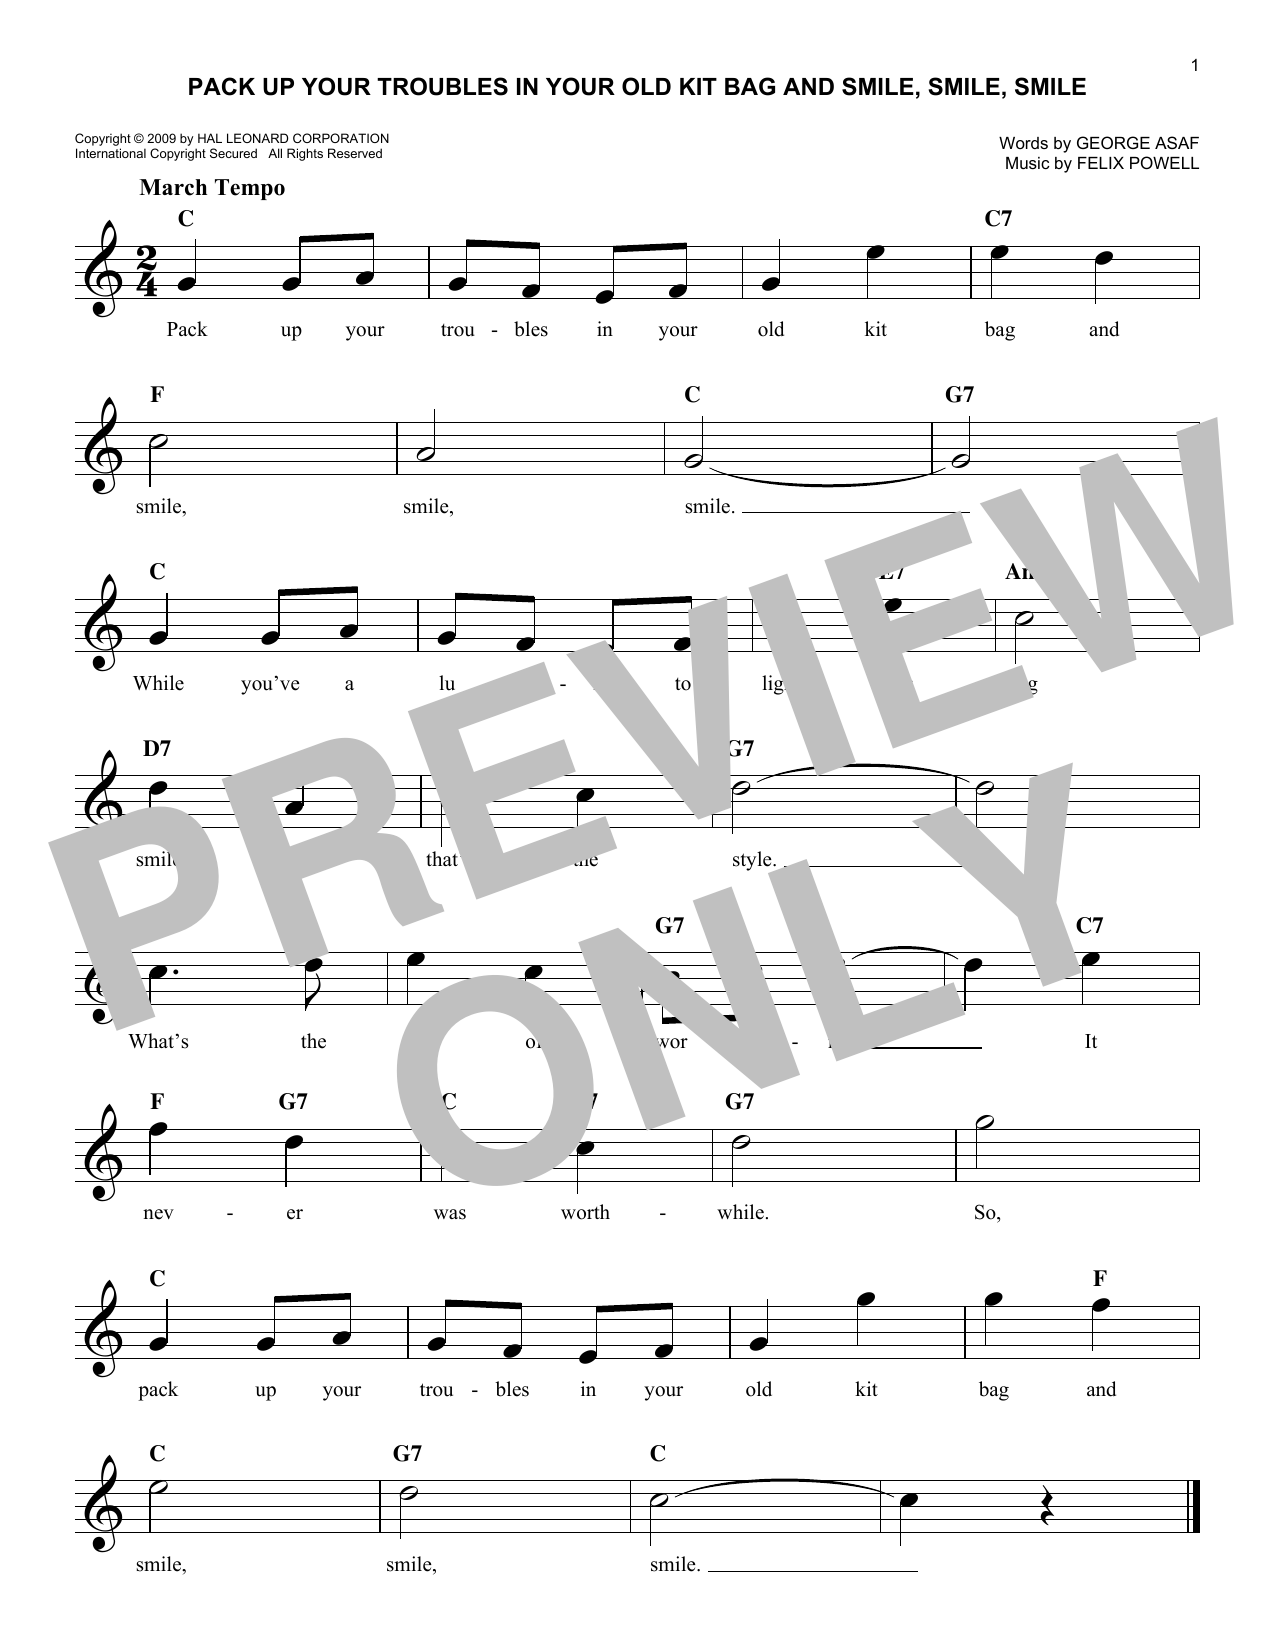 Download Felix Powell Pack Up Your Troubles In Your Old Kit B Sheet Music